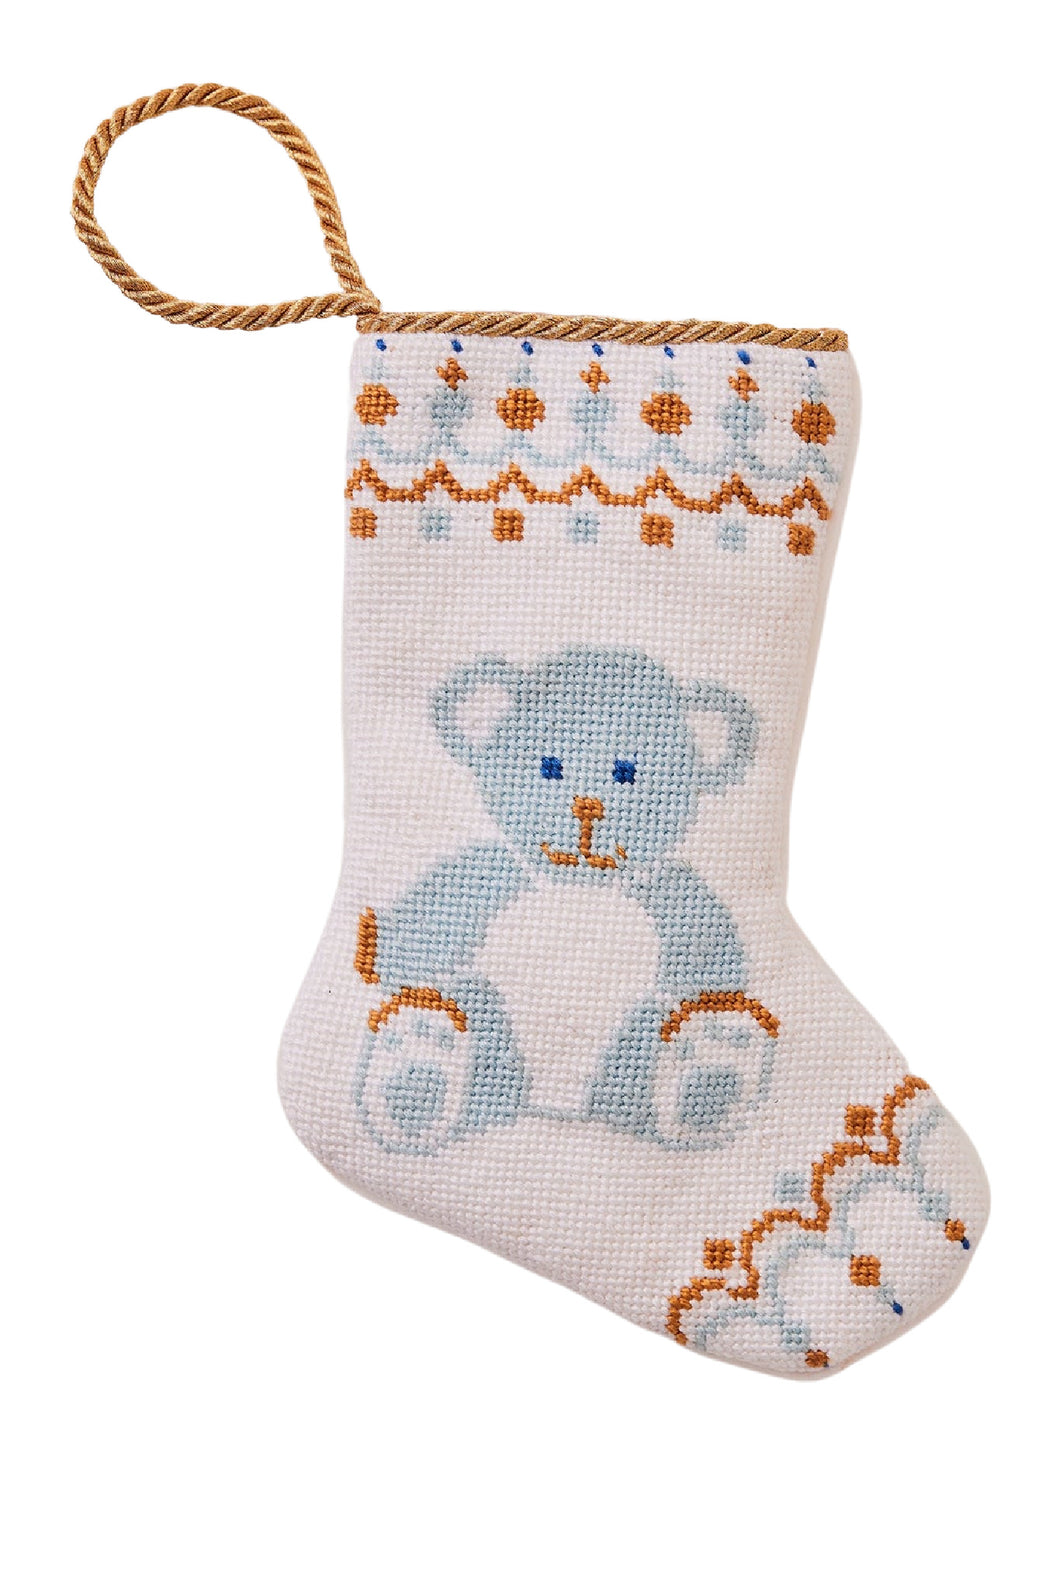 Bear-y Christmas in Blue by Shuler Studio Bauble Stocking